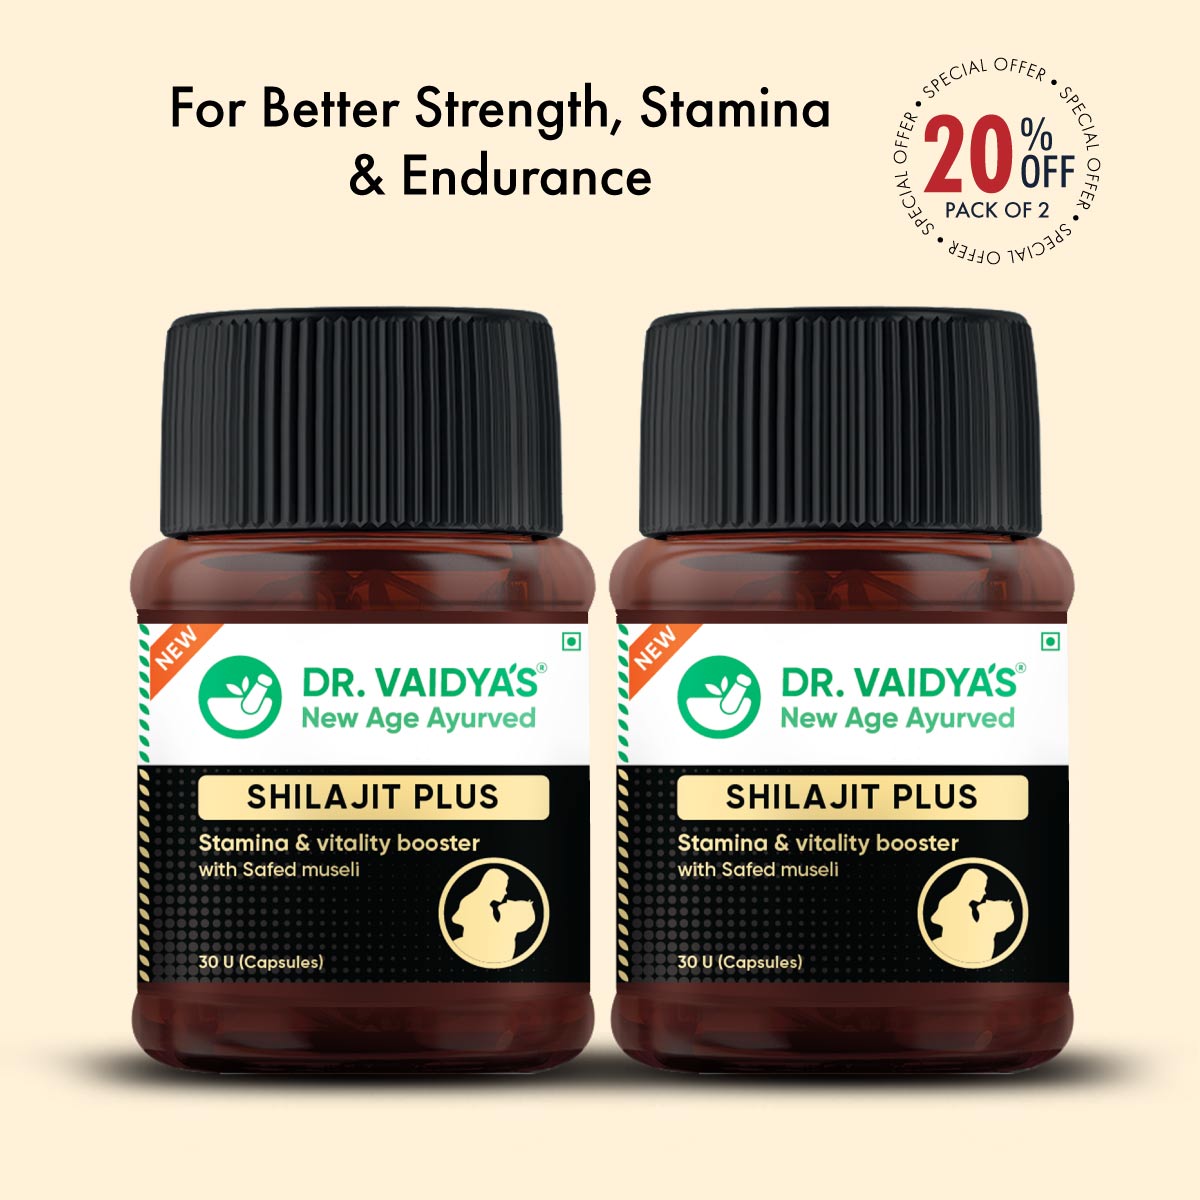 Shilajit Plus Capsules: More Strength & Stamina To Your Performance